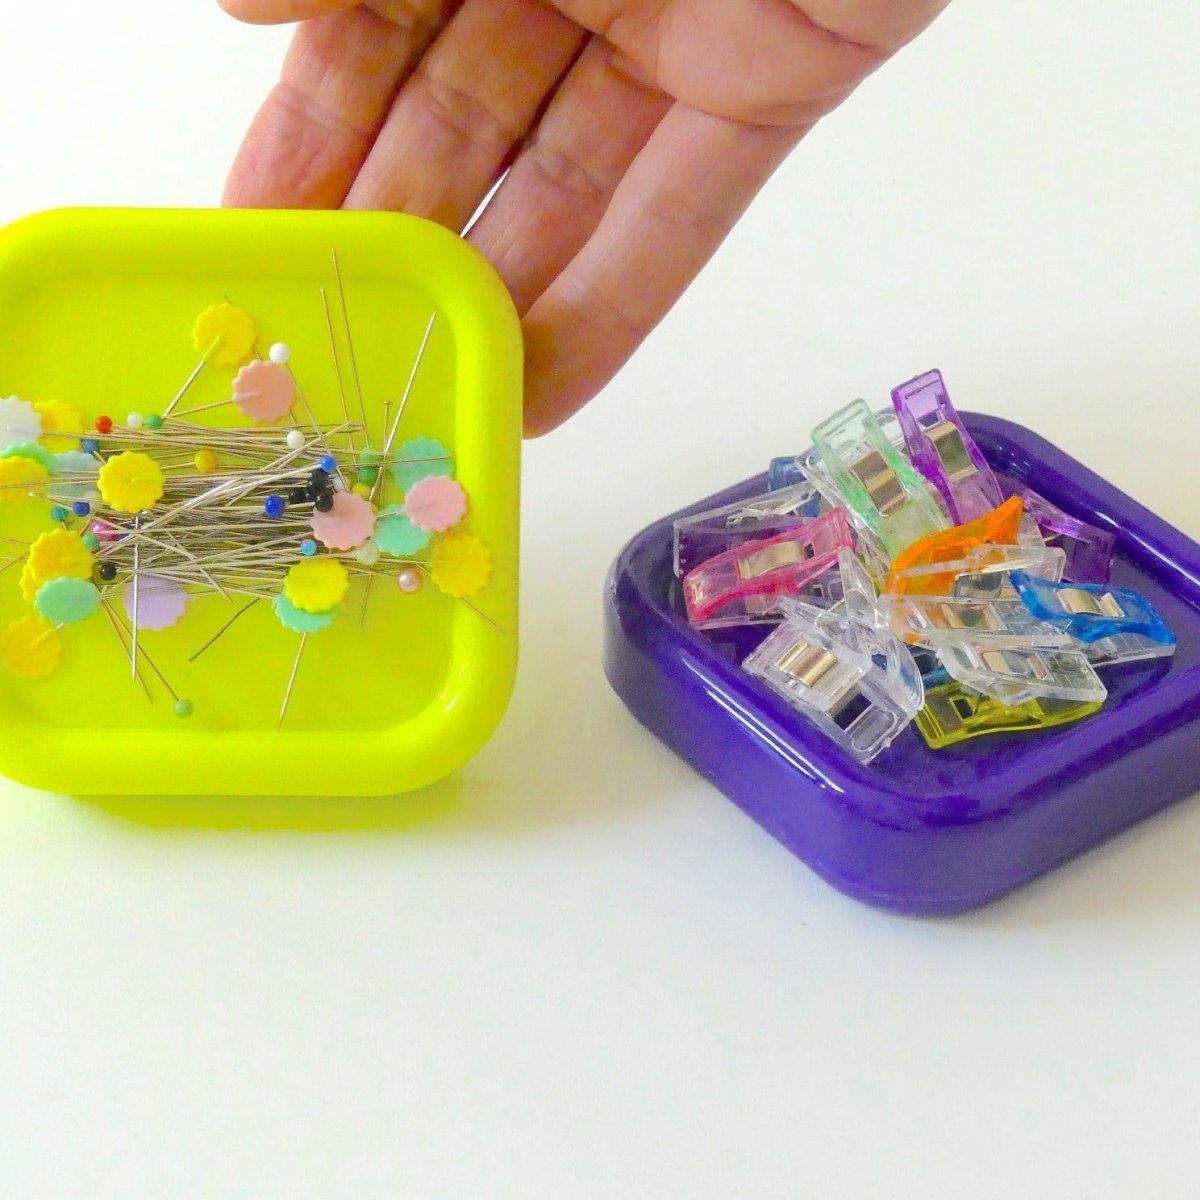 Magnetic Pin Cushions with pins and clips on them...both the Lime Green and Purple are shown.